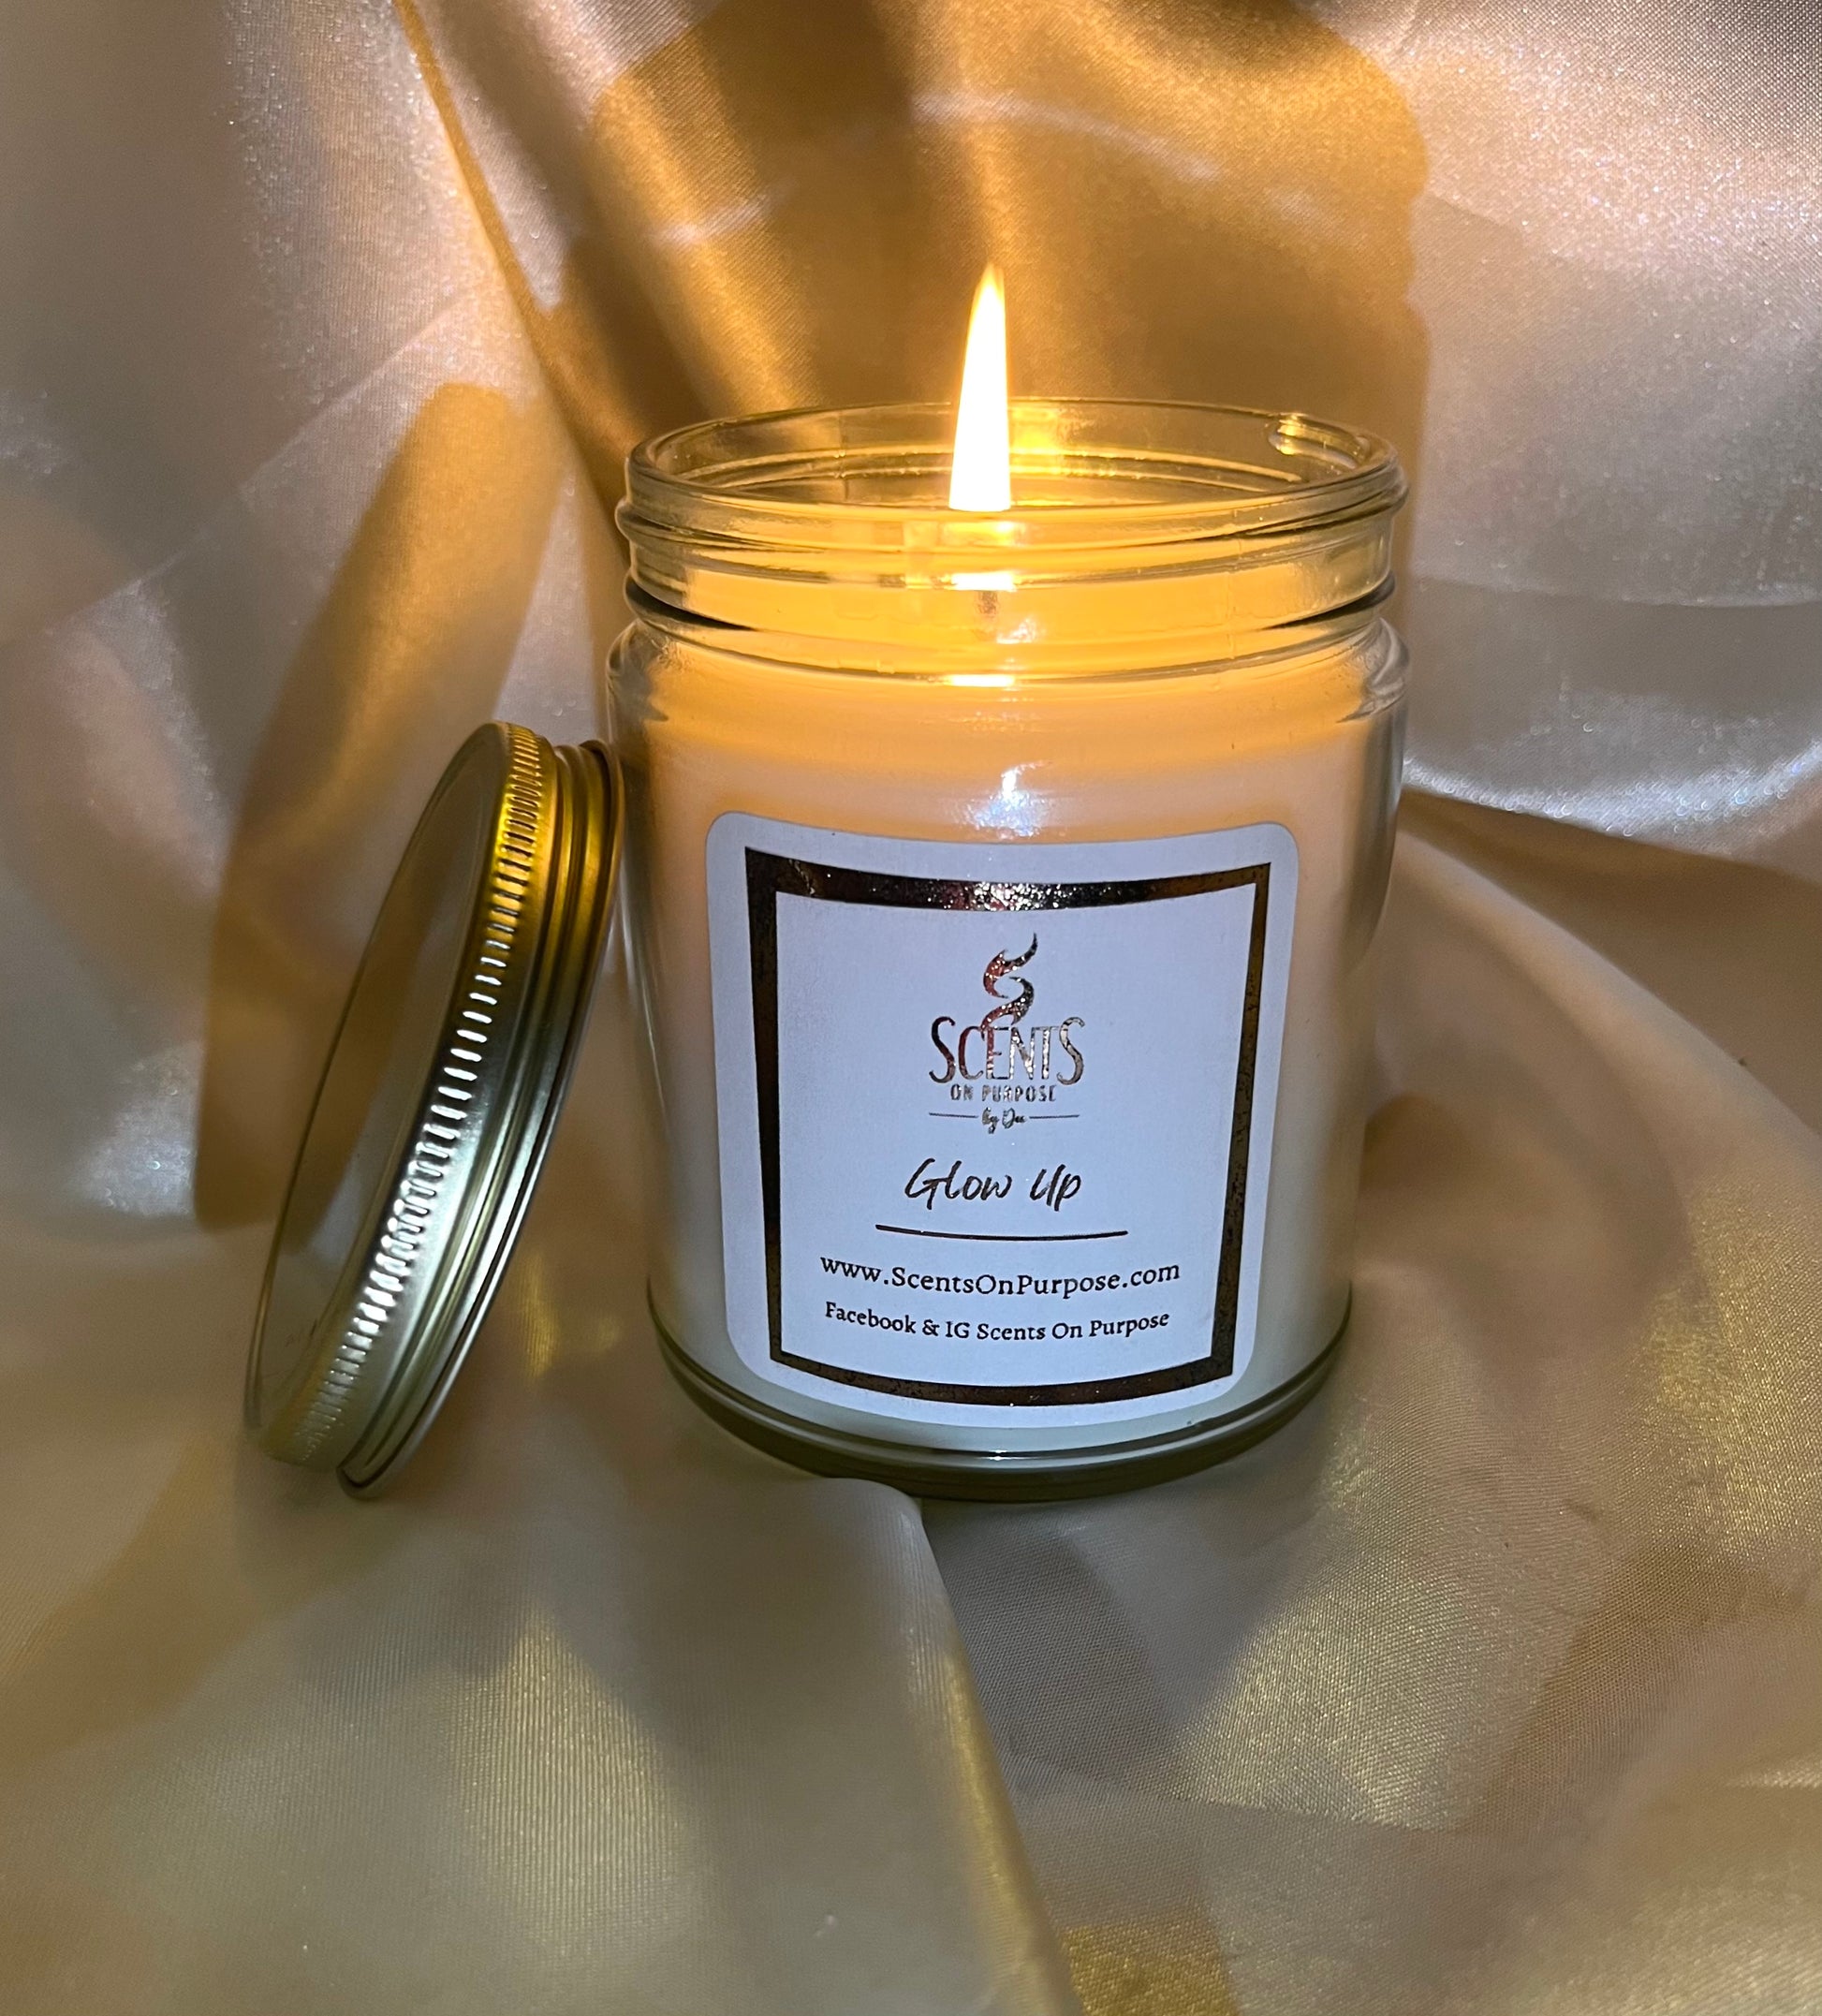 Sun Dried Linen 8 oz Scented Candle